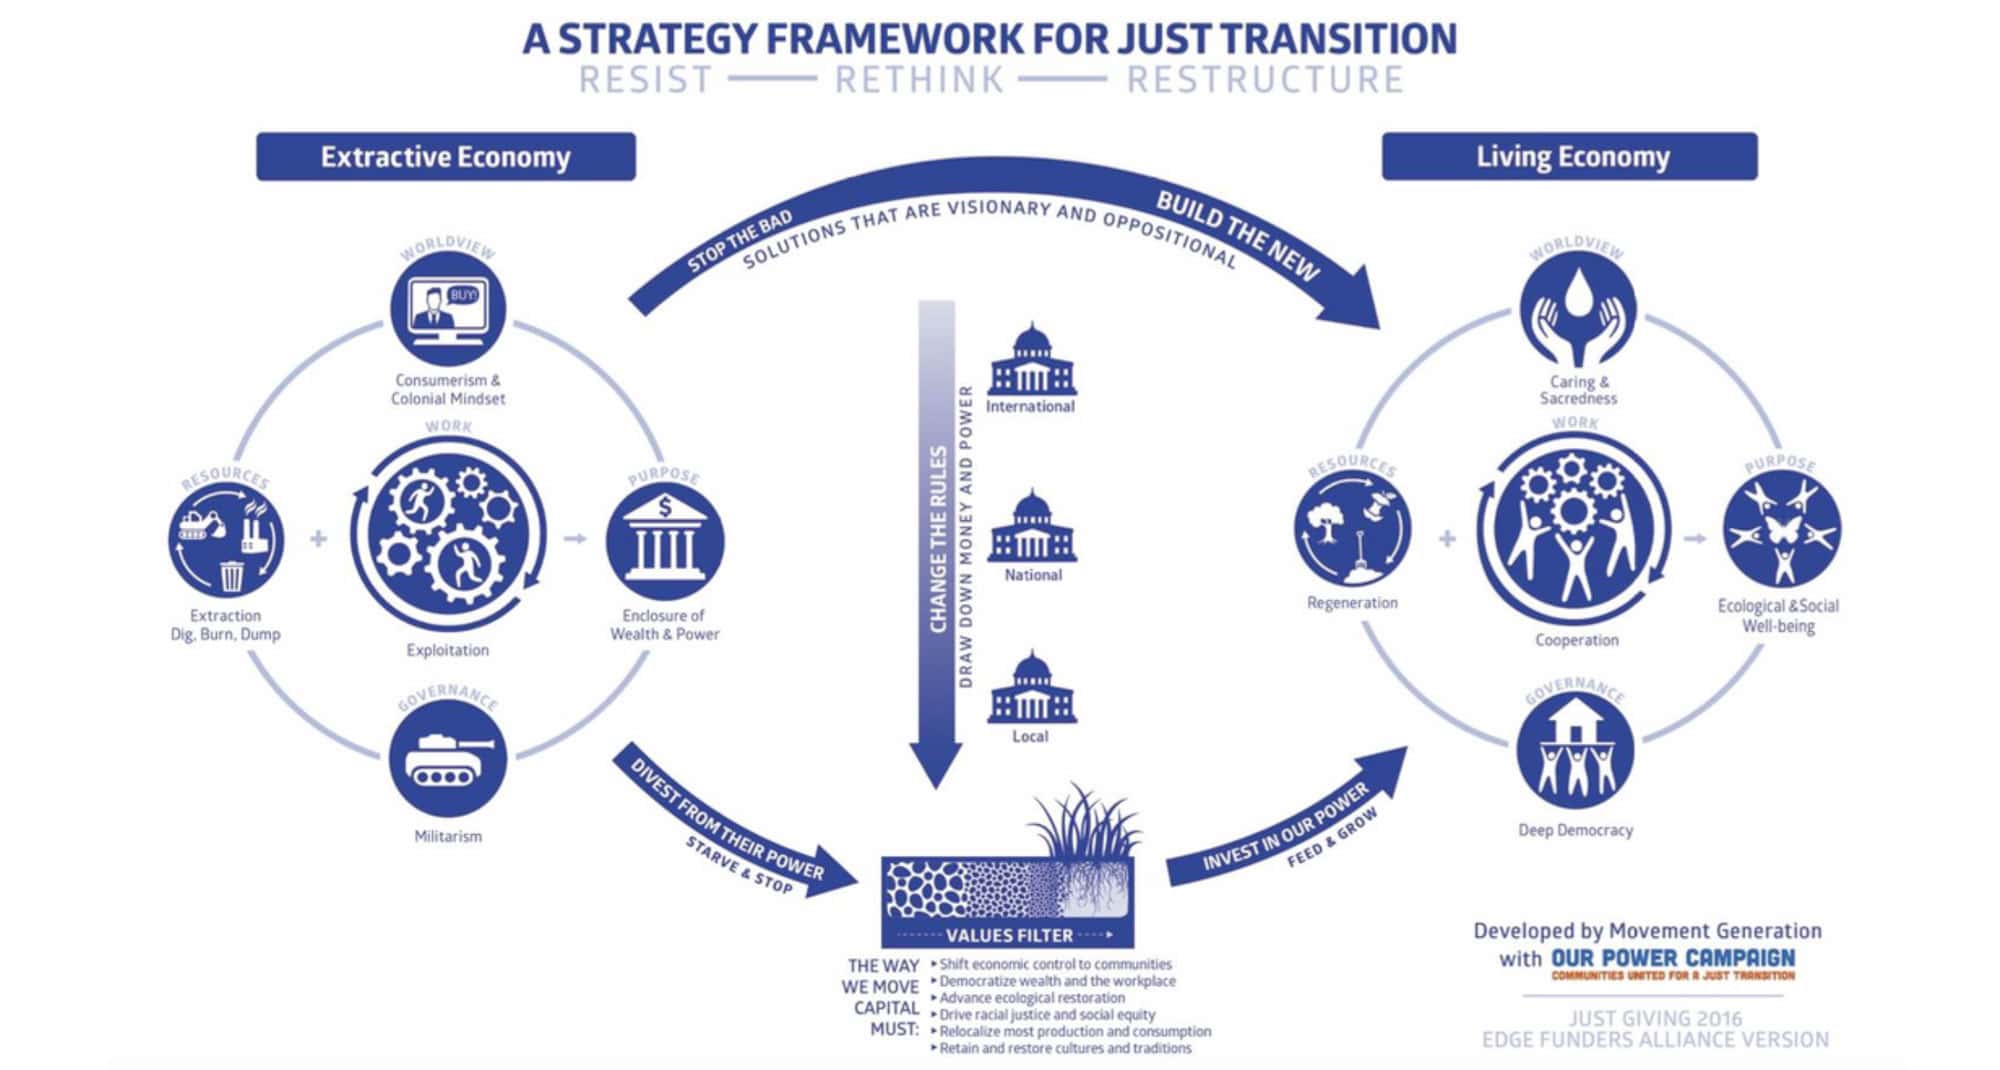 A STRATEGY FRAMEWORK FOR JUST TRANSITION